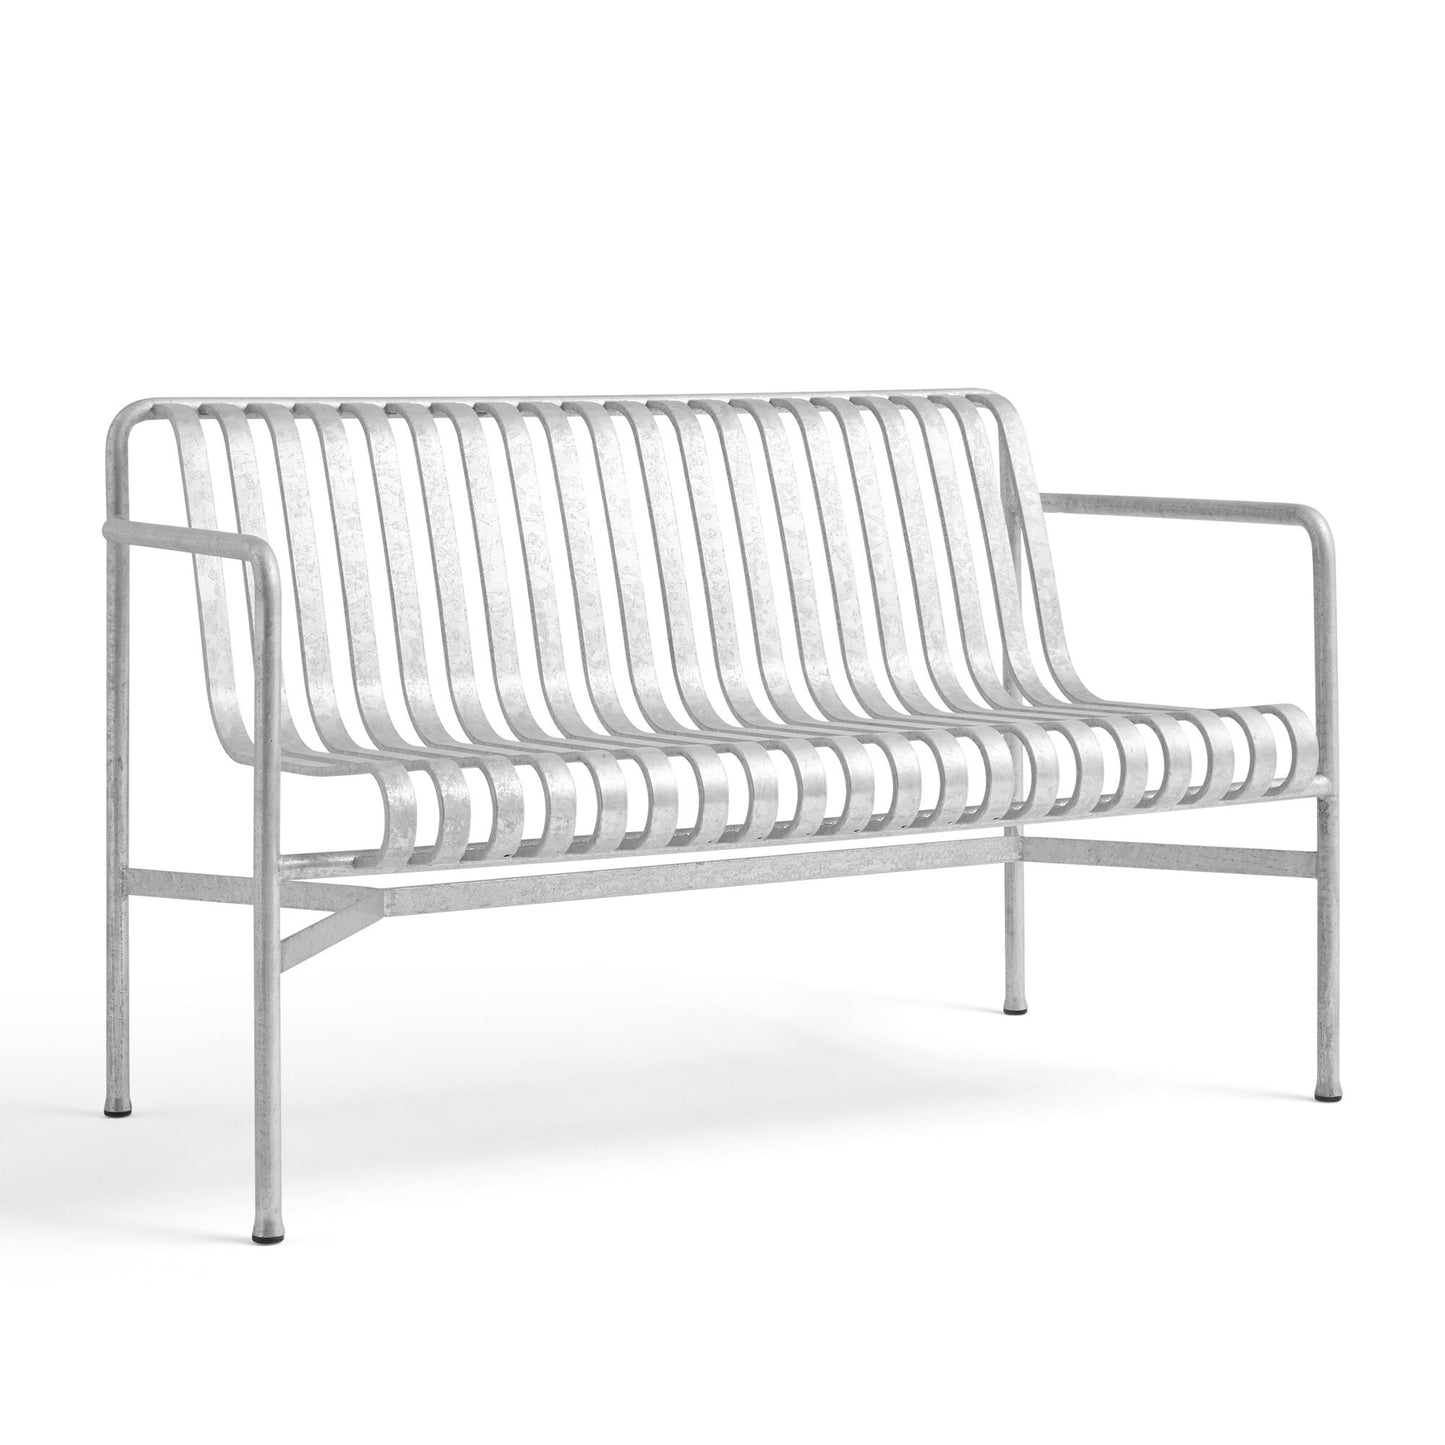 Palisade Dining Bench with Armrests by HAY #Hot Galvanized Steel